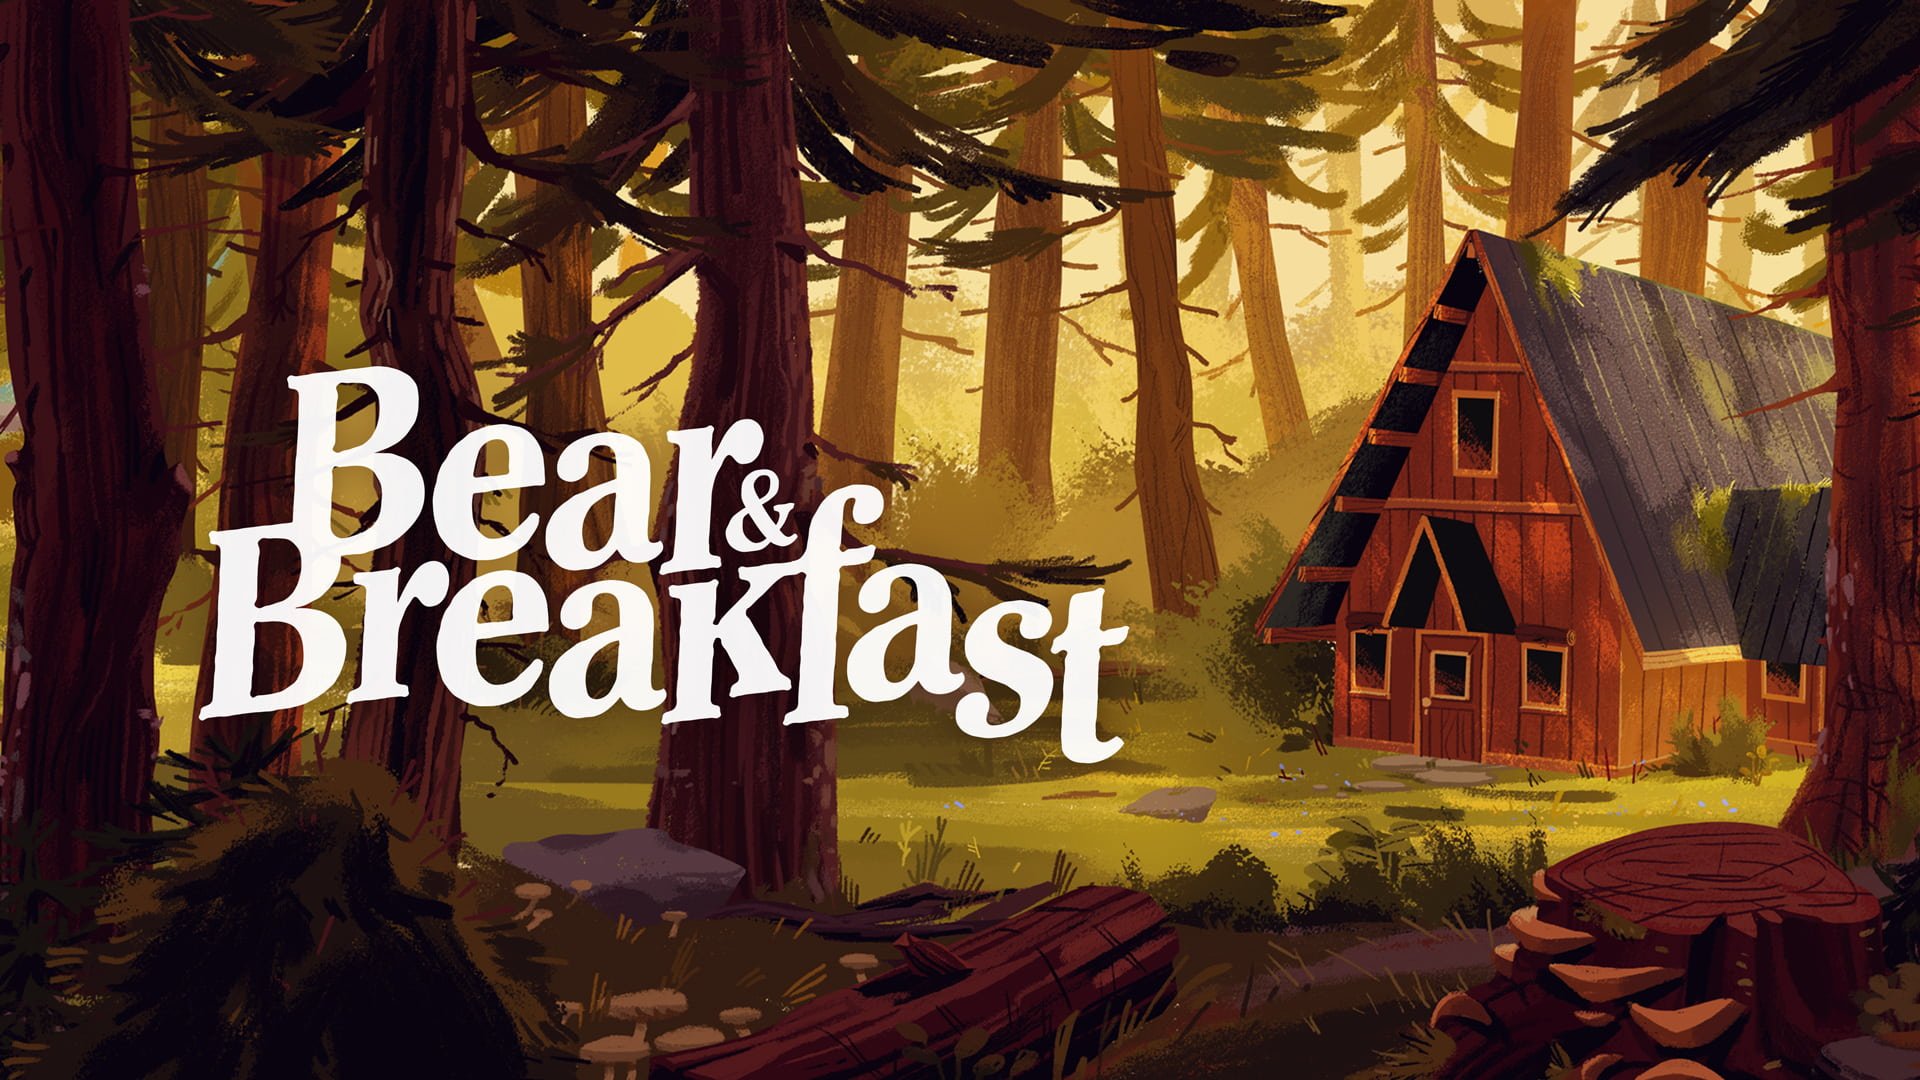 Image is poster of Best and Breakfast game. There is forest and hut in the background.